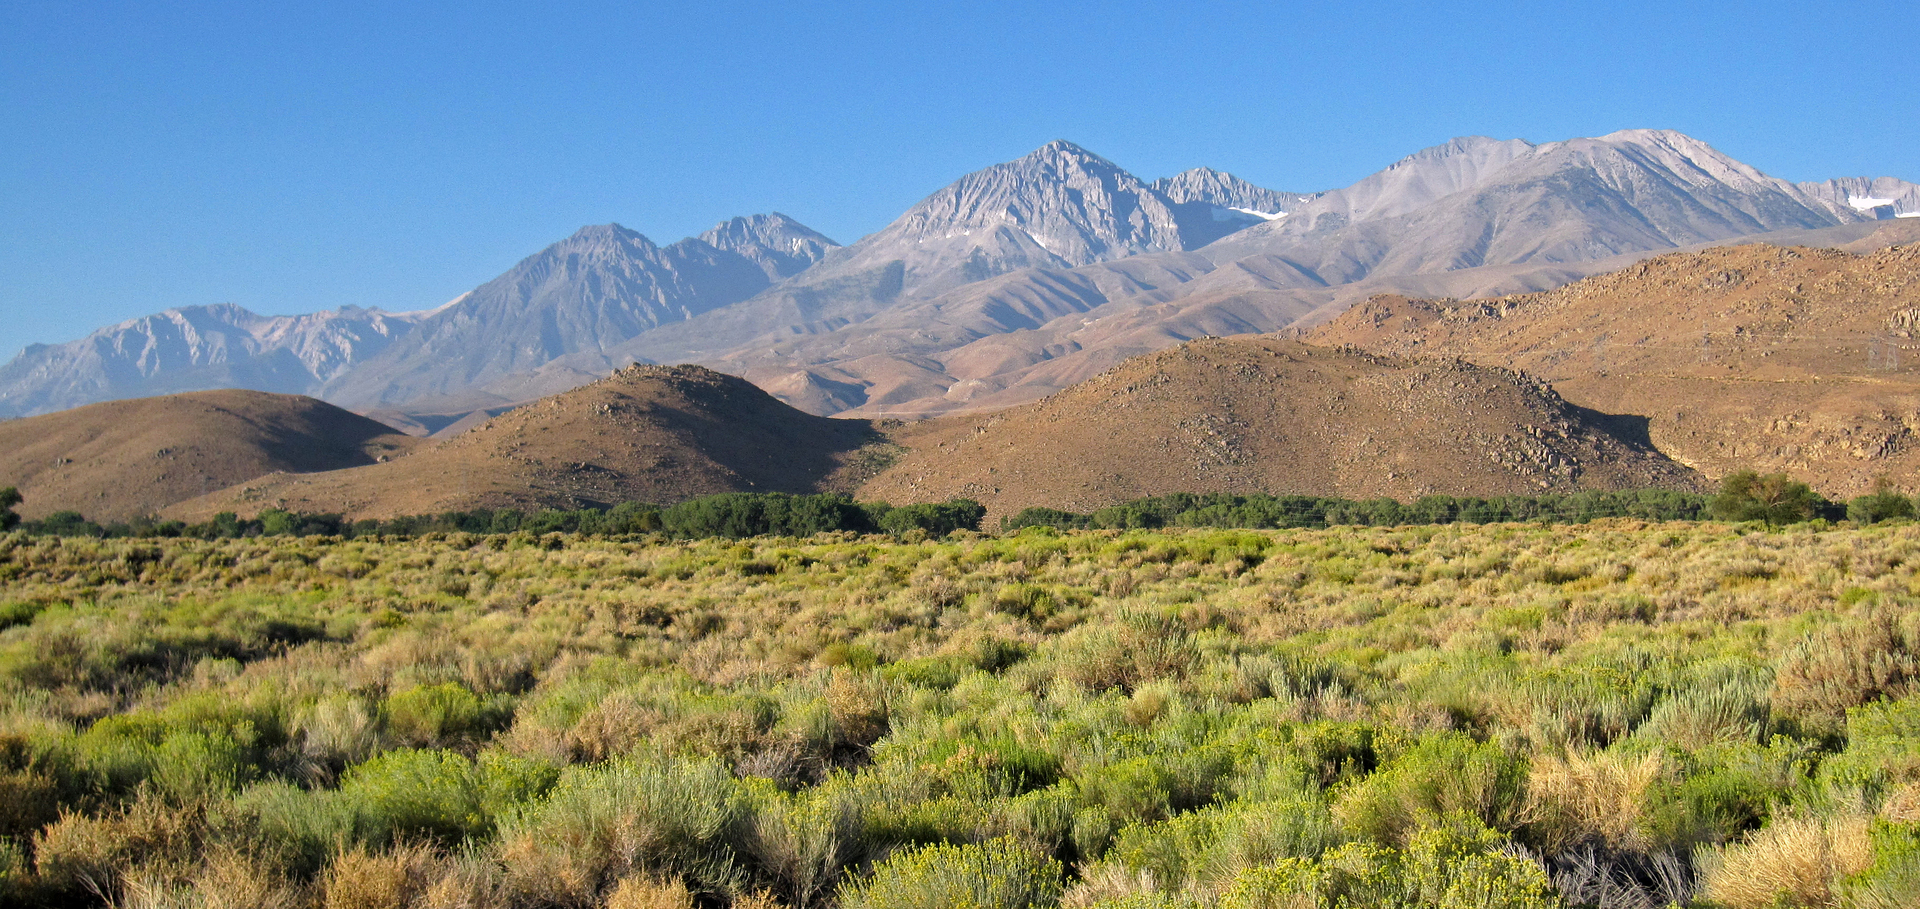 from the Owens Valley, near Big Pine, California